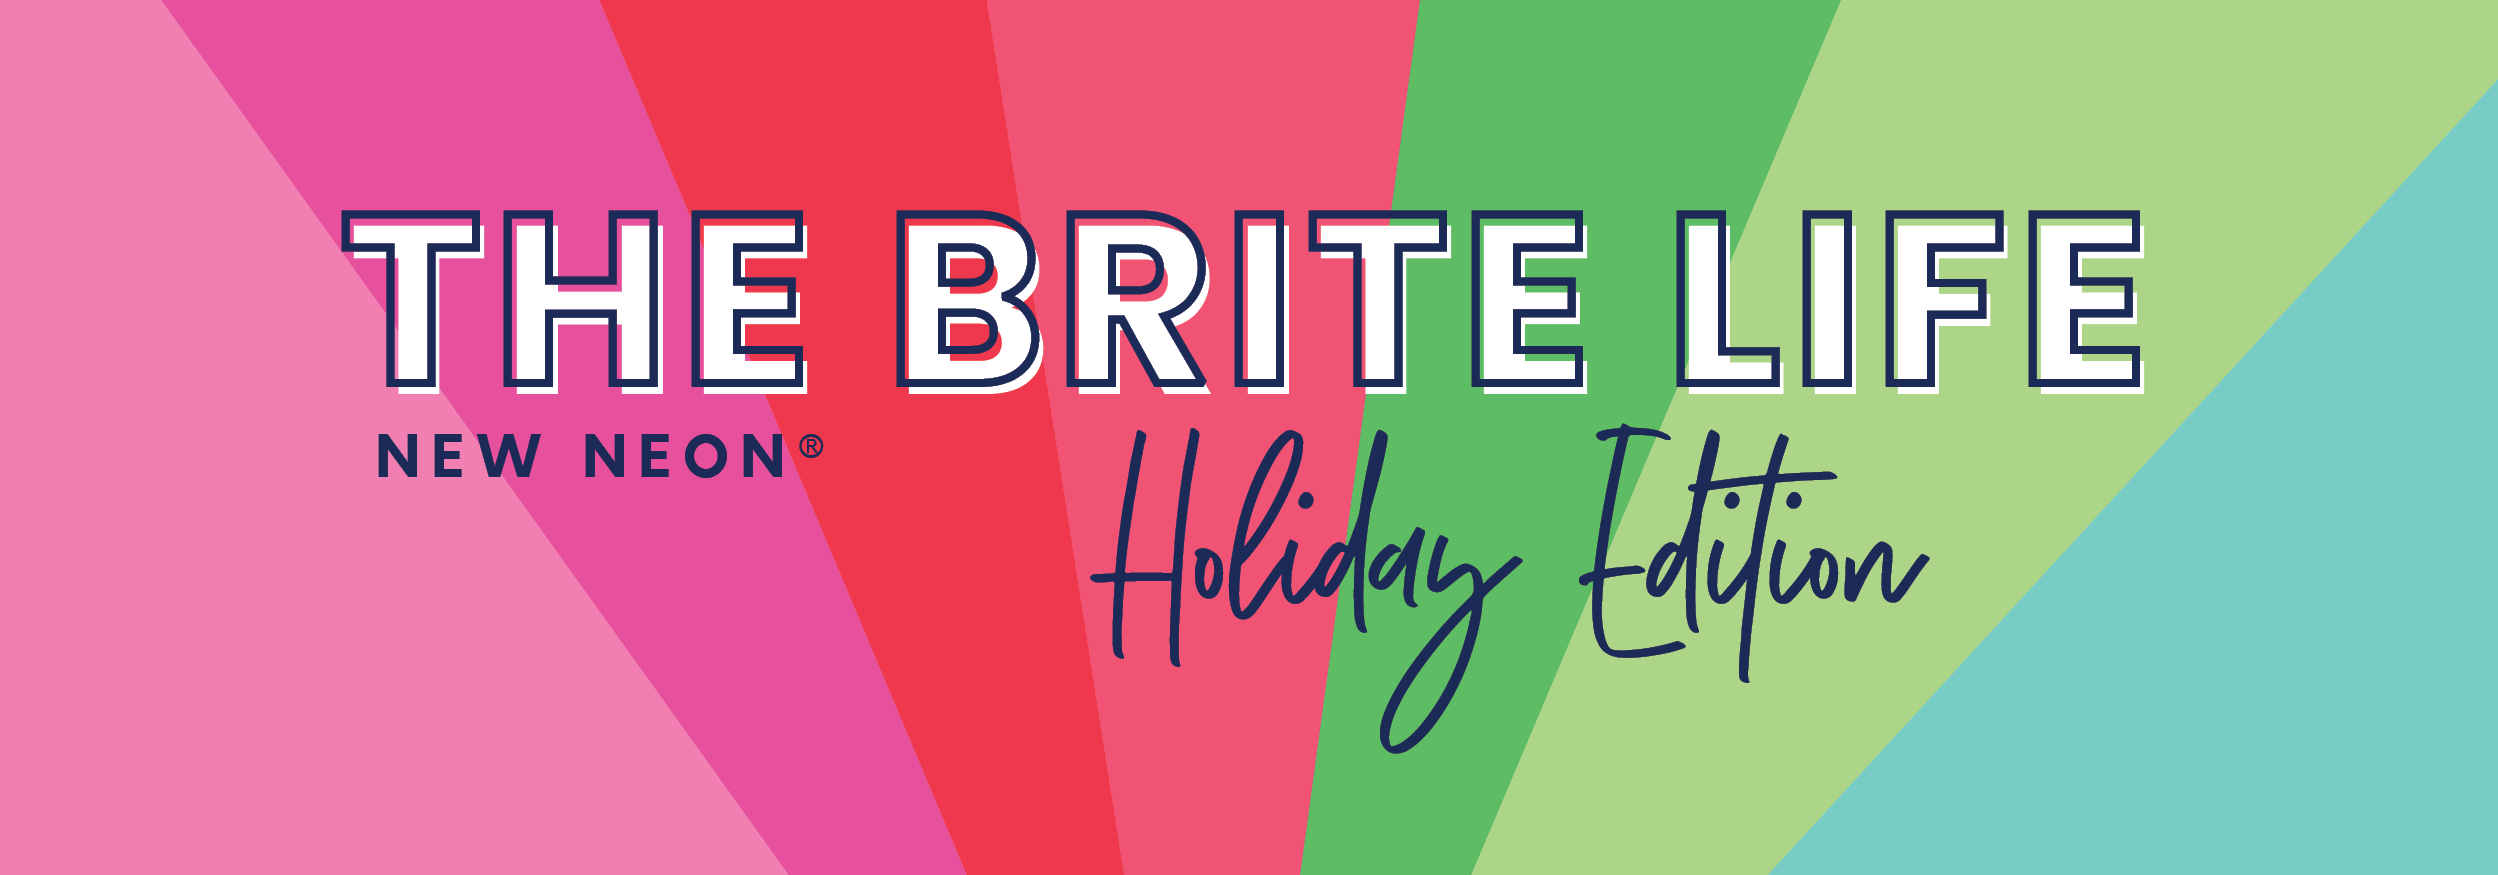 Brite Lite BFCM Email Designs 2021 - 11.18.2021 Newsletter Gift Guide 001.png